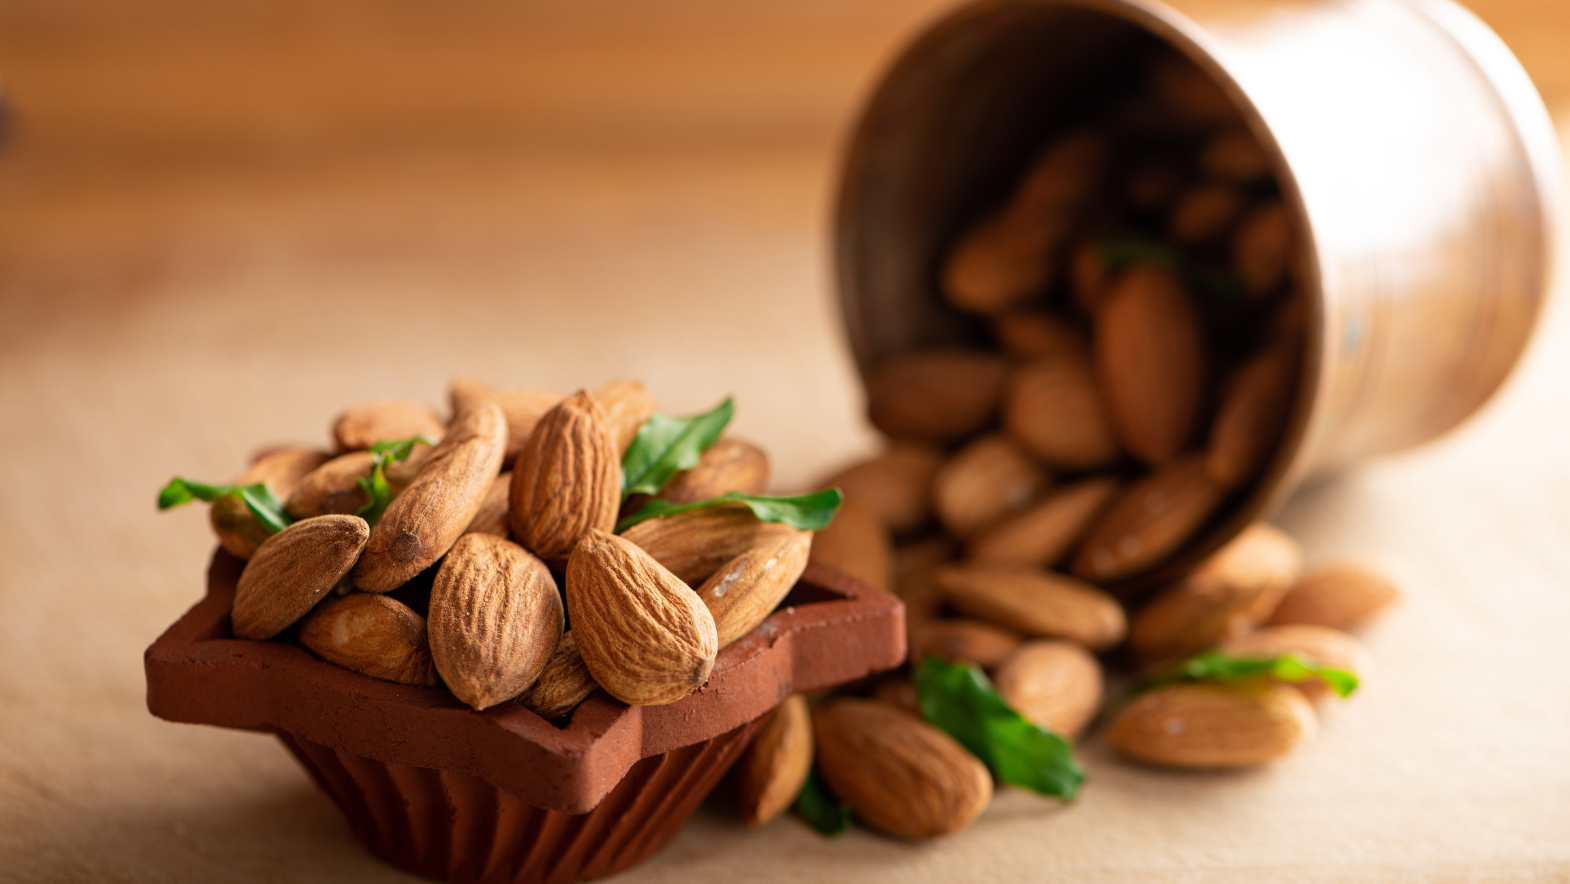 Eating almonds can help you shed off some weight, new study says 